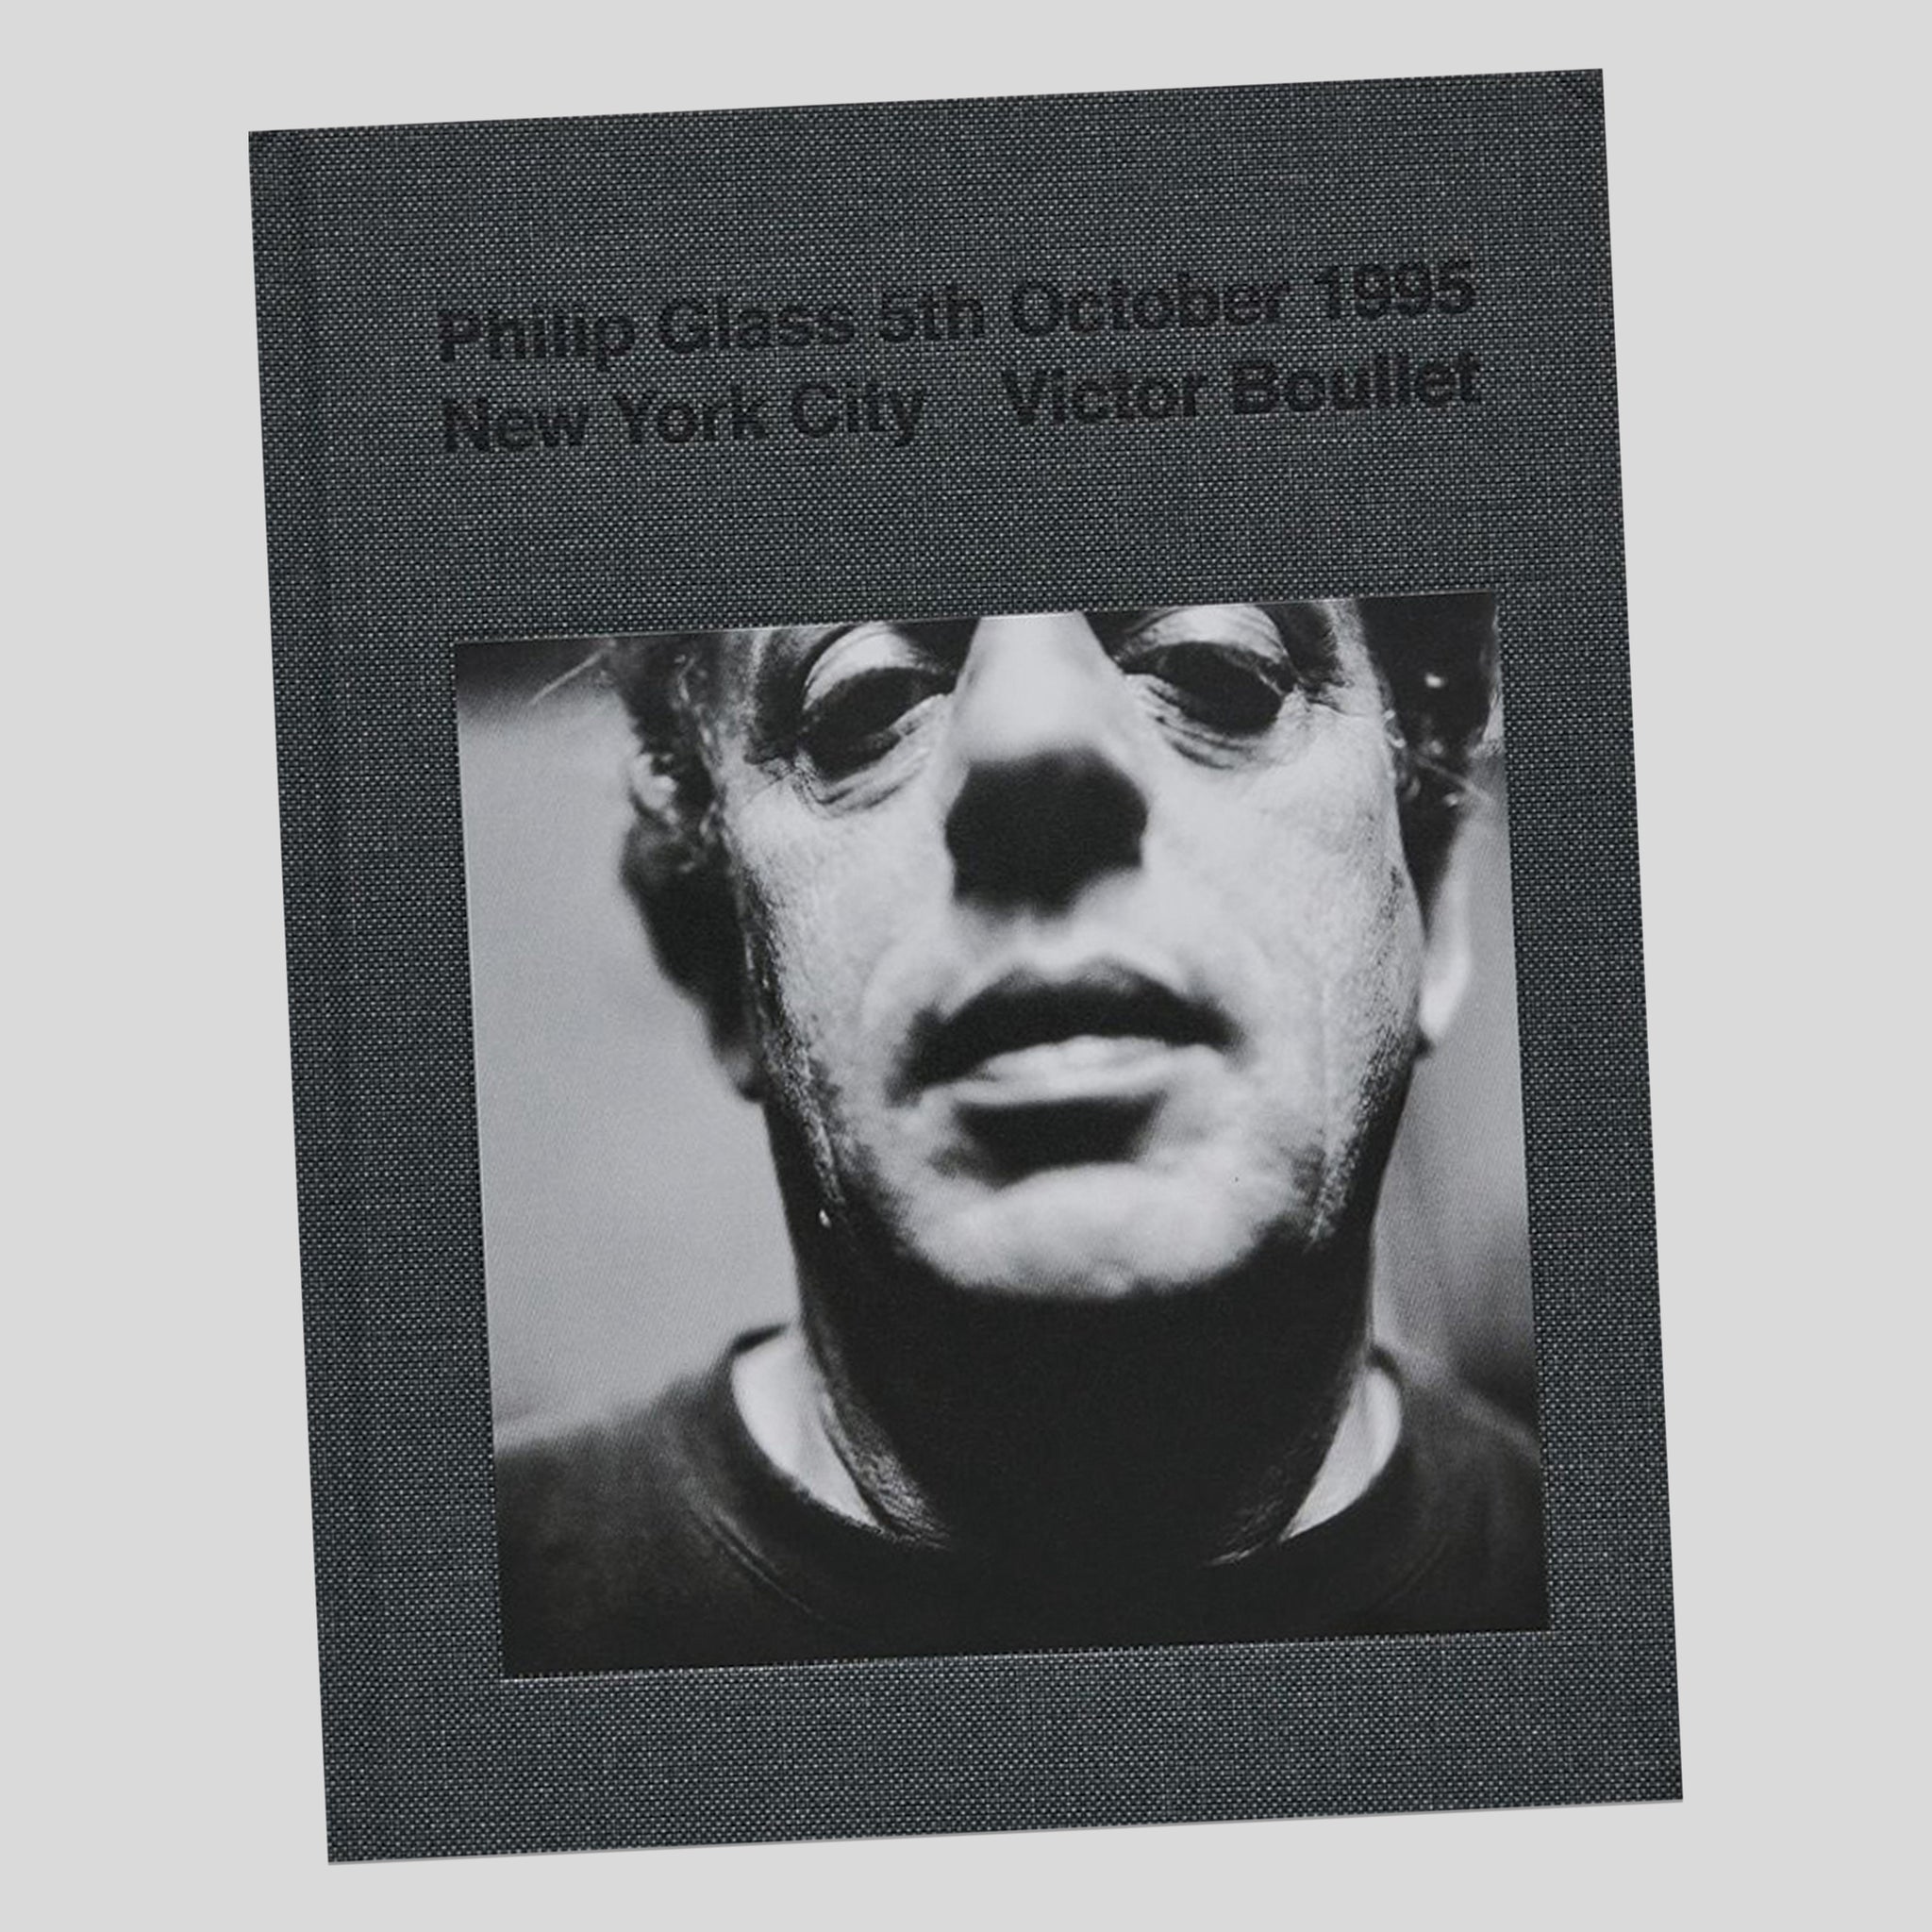 Philip Glass, 5th October 1995 New York City - Victor Boullet